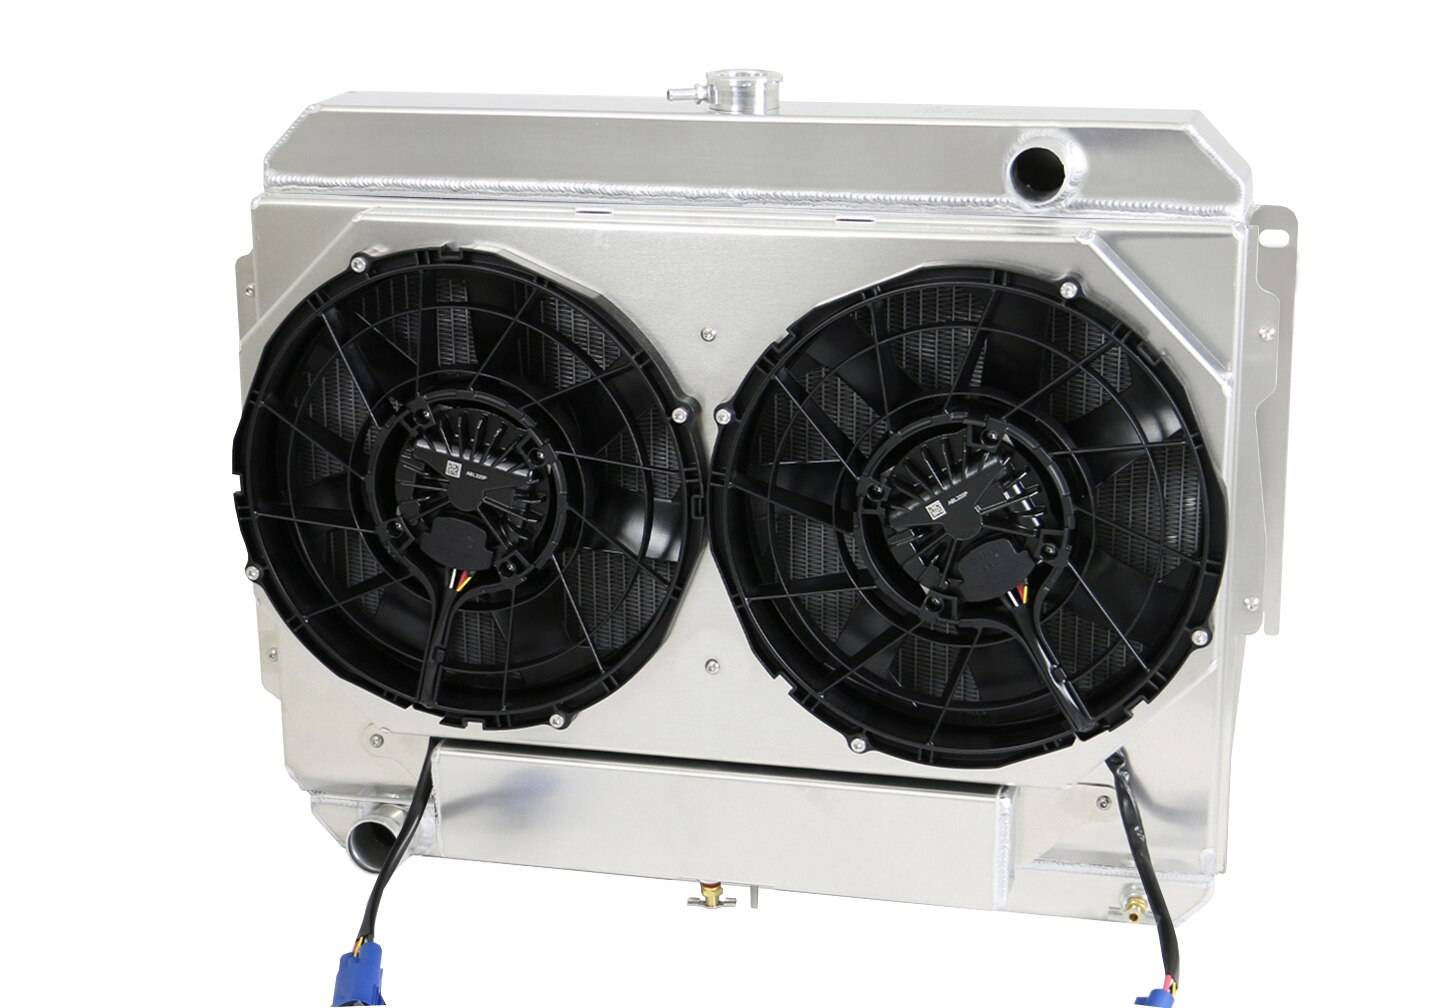 Wizard Cooling Inc - Wizard Cooling - 1966-1969 26", Small Block, Mopar Applications Aluminum Radiator w/ Brushless Fans - 1638-212BLX